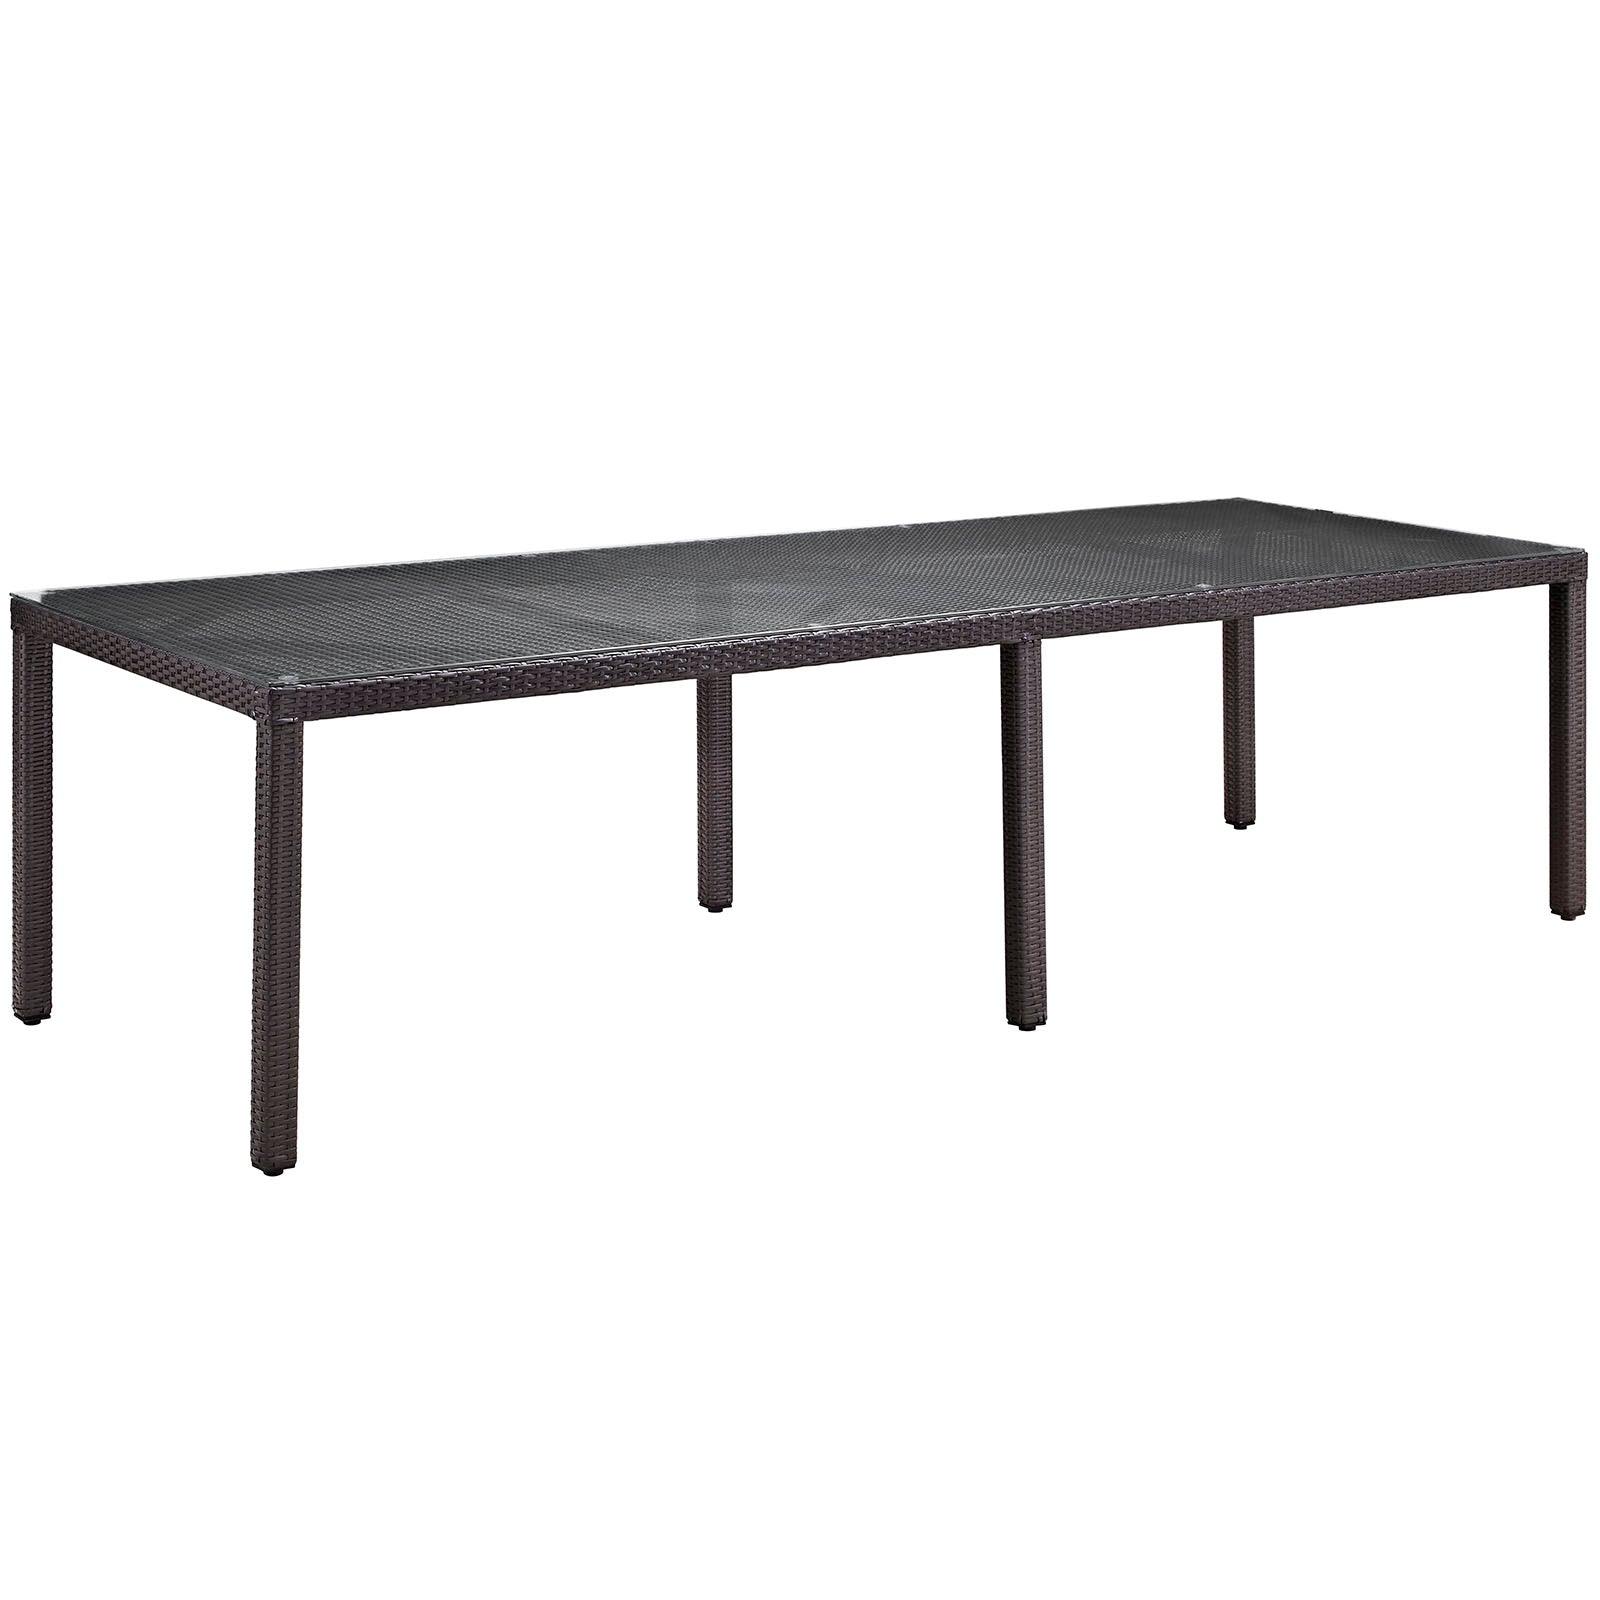 Modway Convene 114" Outdoor Patio Dining Table FredCo